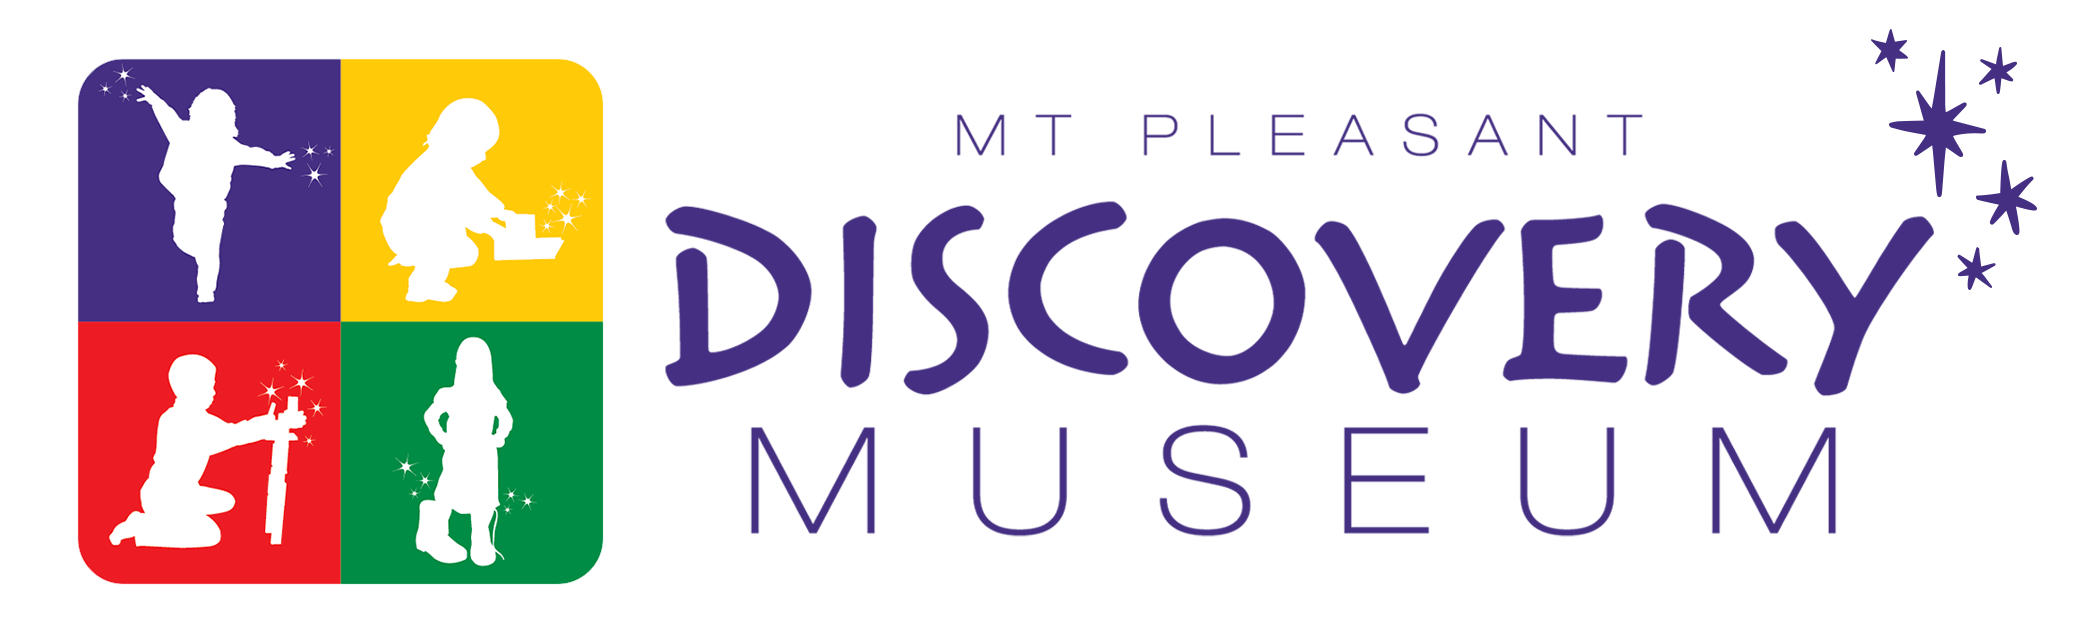 http://Mt.%20Pleasant%20Discovery%20Museum